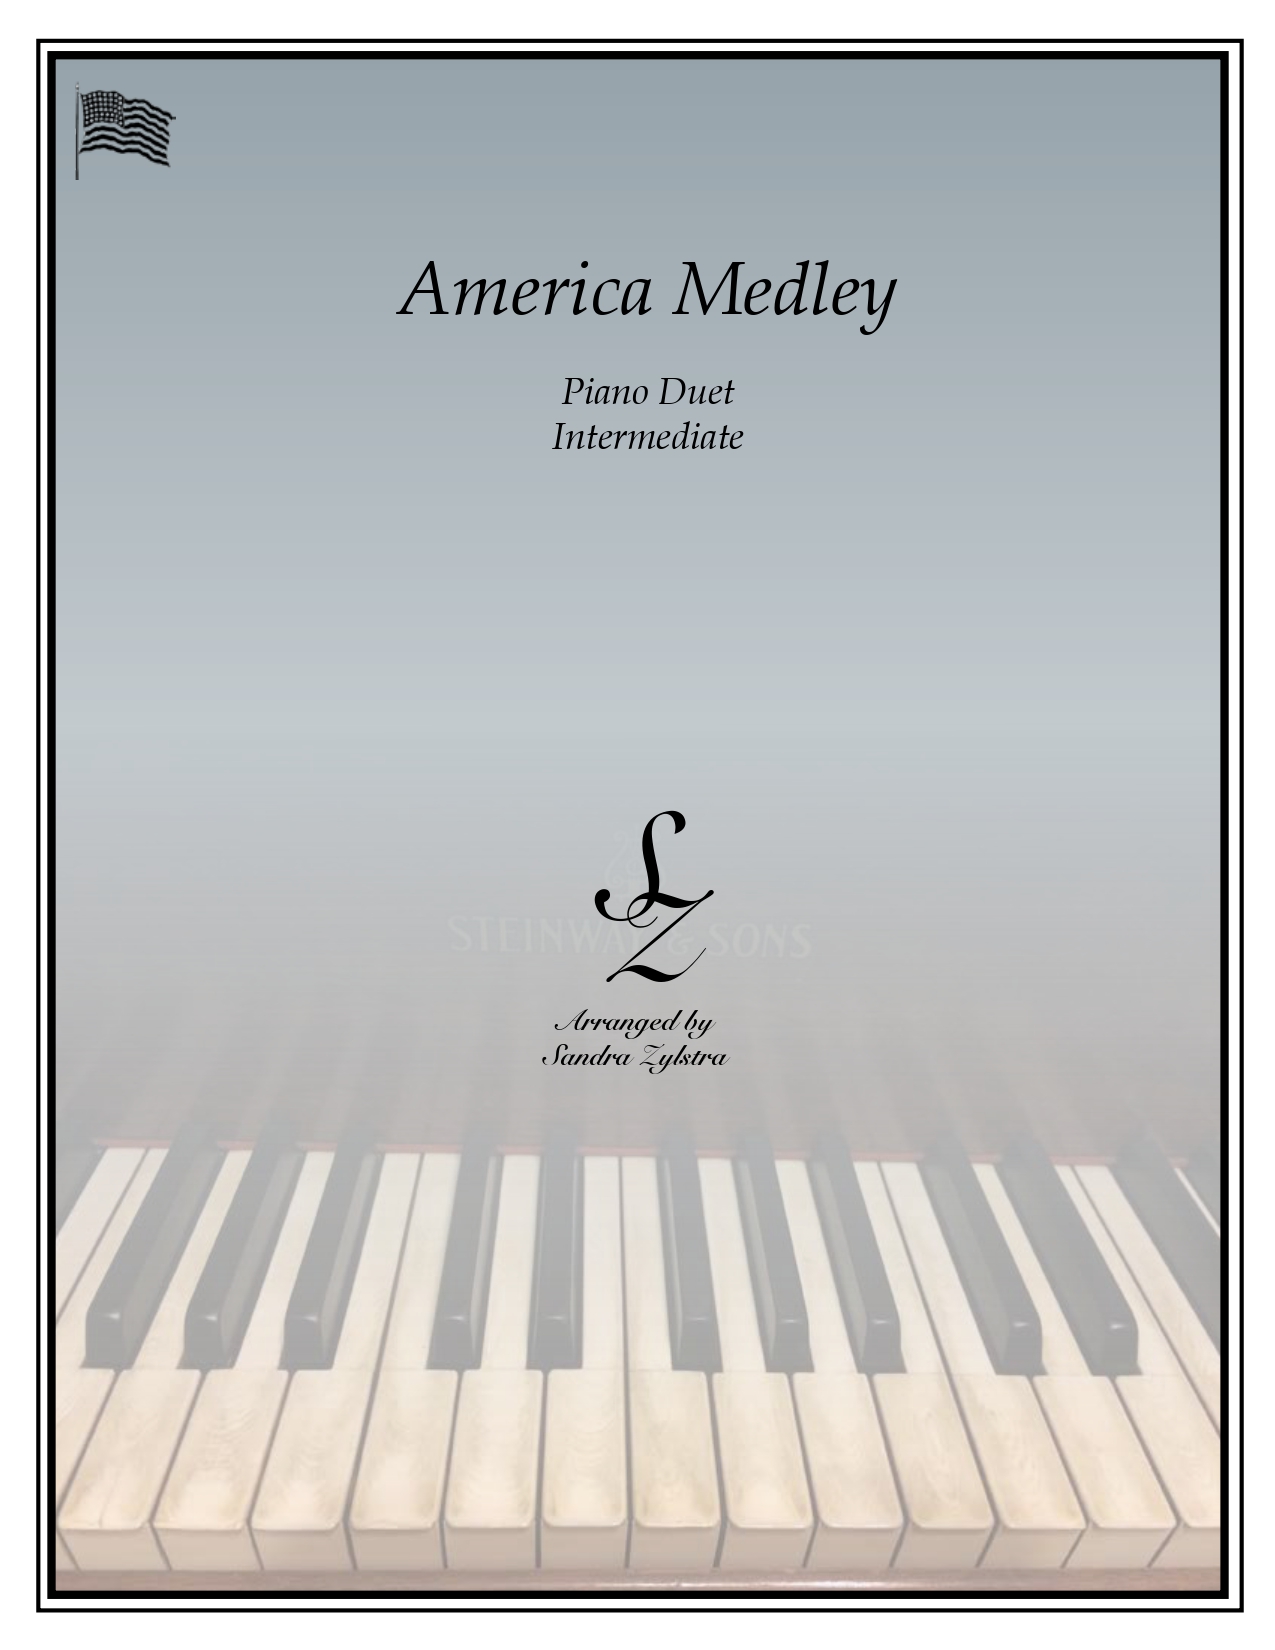 America Medley intermediate duet cover page 00011